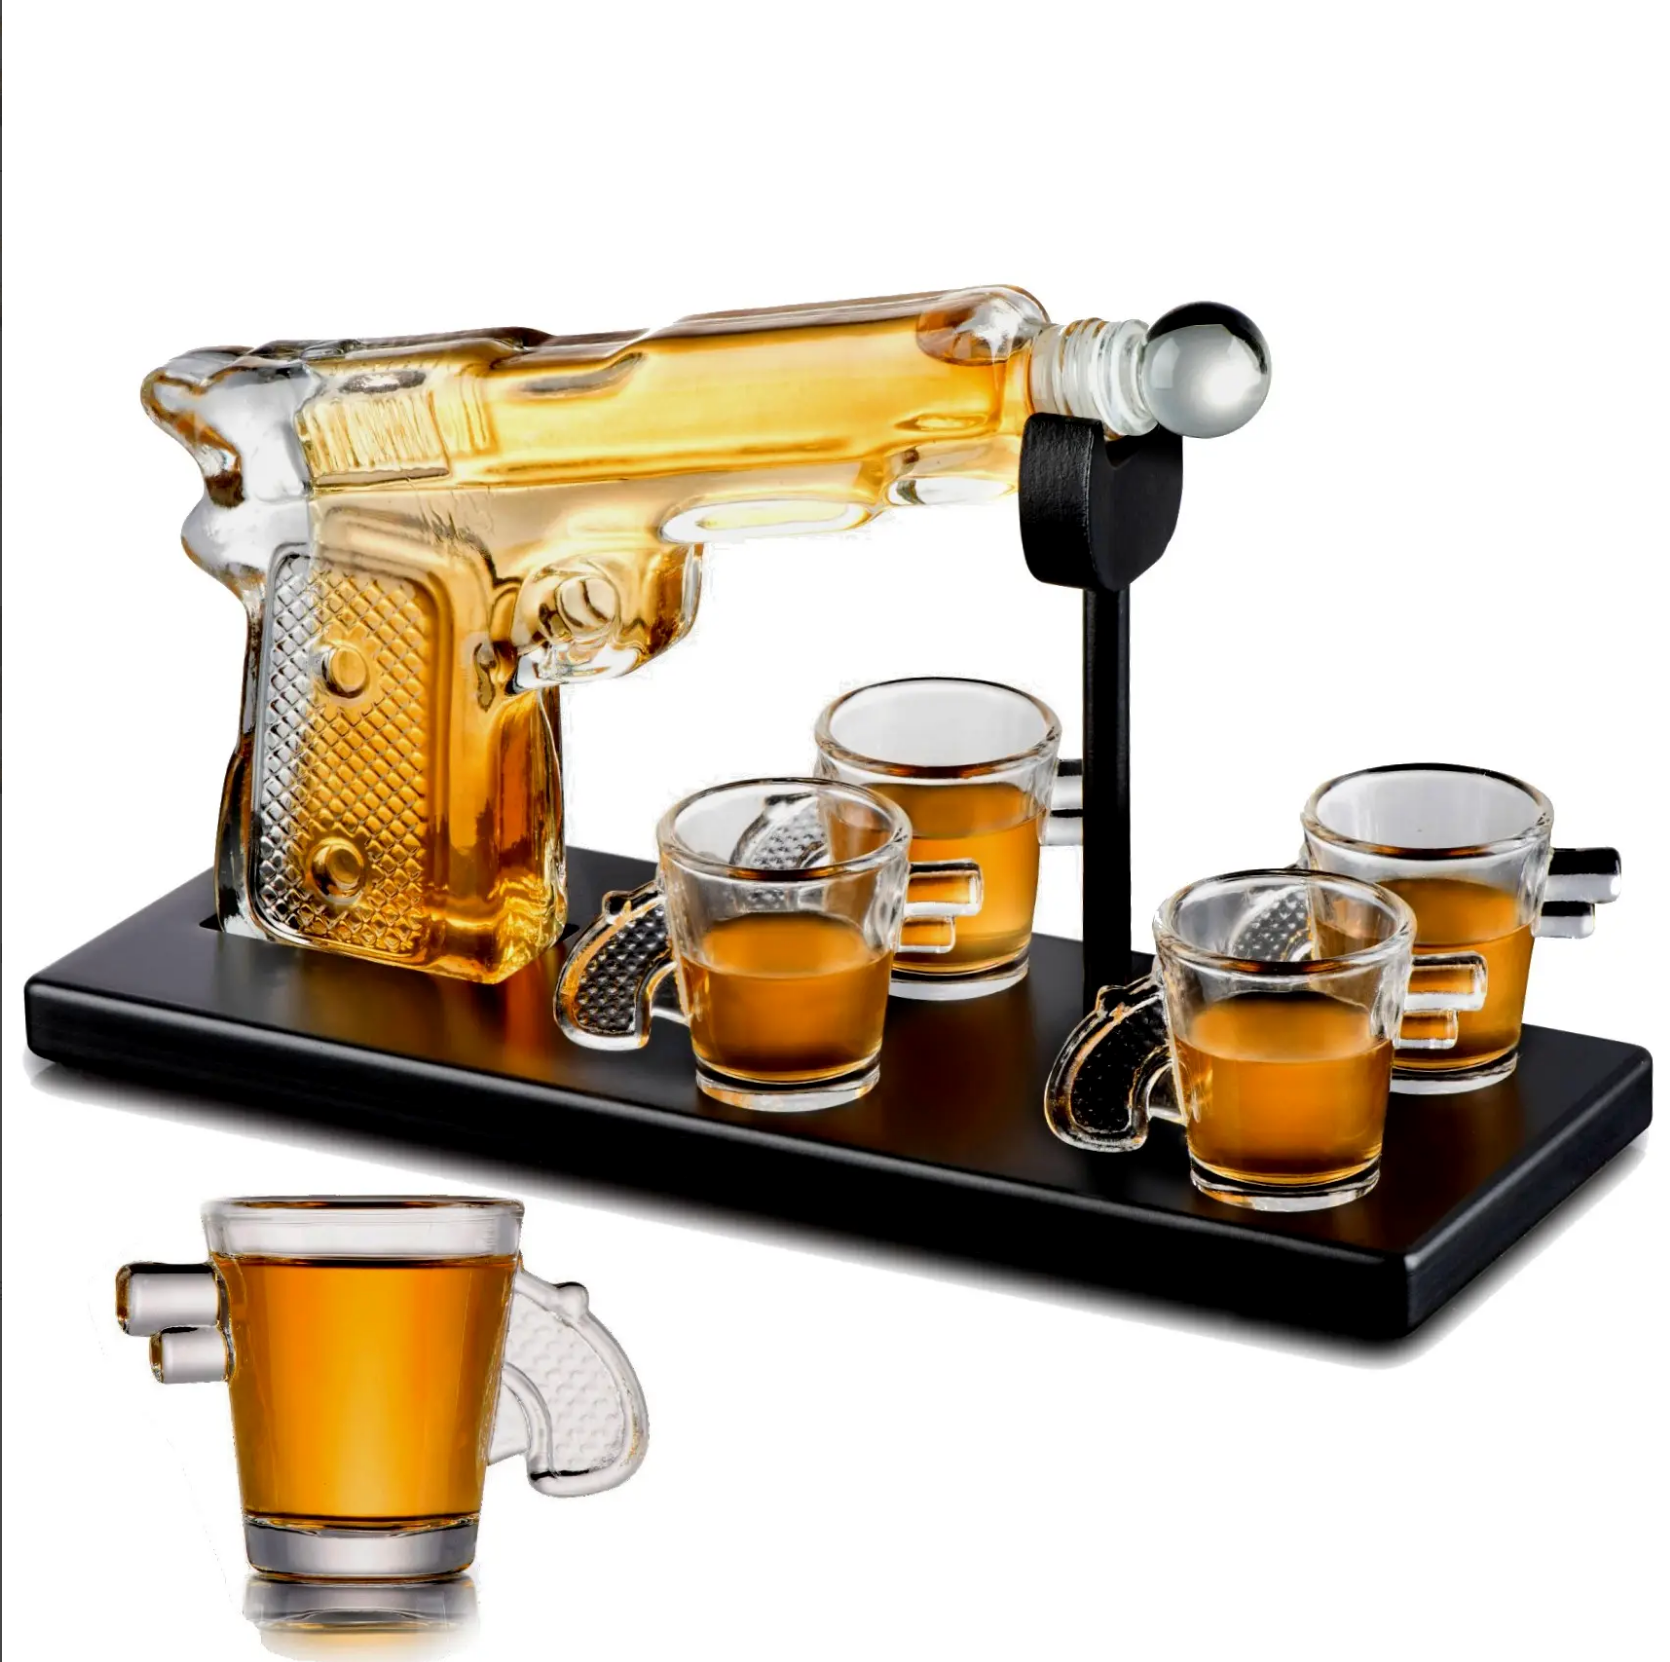 Gun Decanter Set with 4 Gun Shaped Glasses on Tray